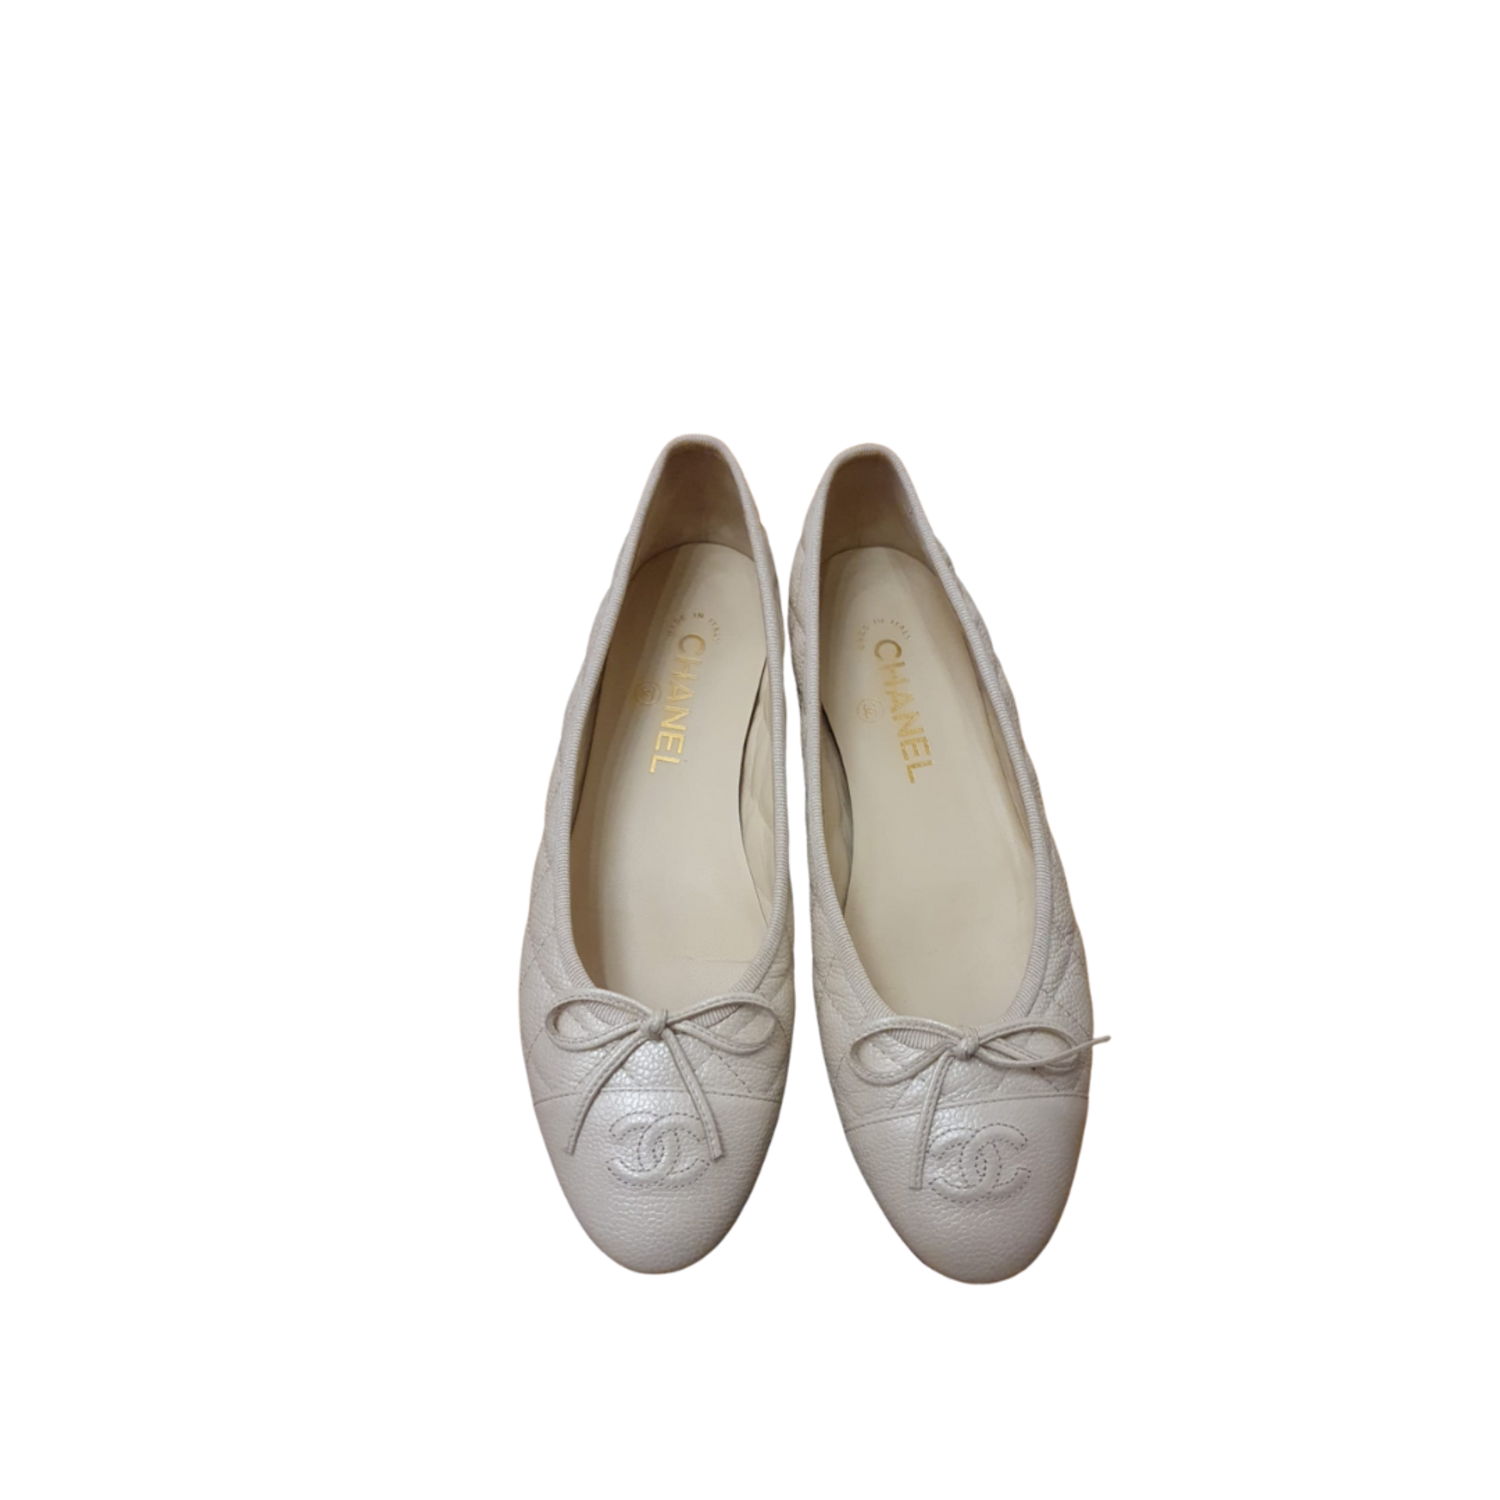 Ballet flats Chanel  385 buy preowned at 270 EUR